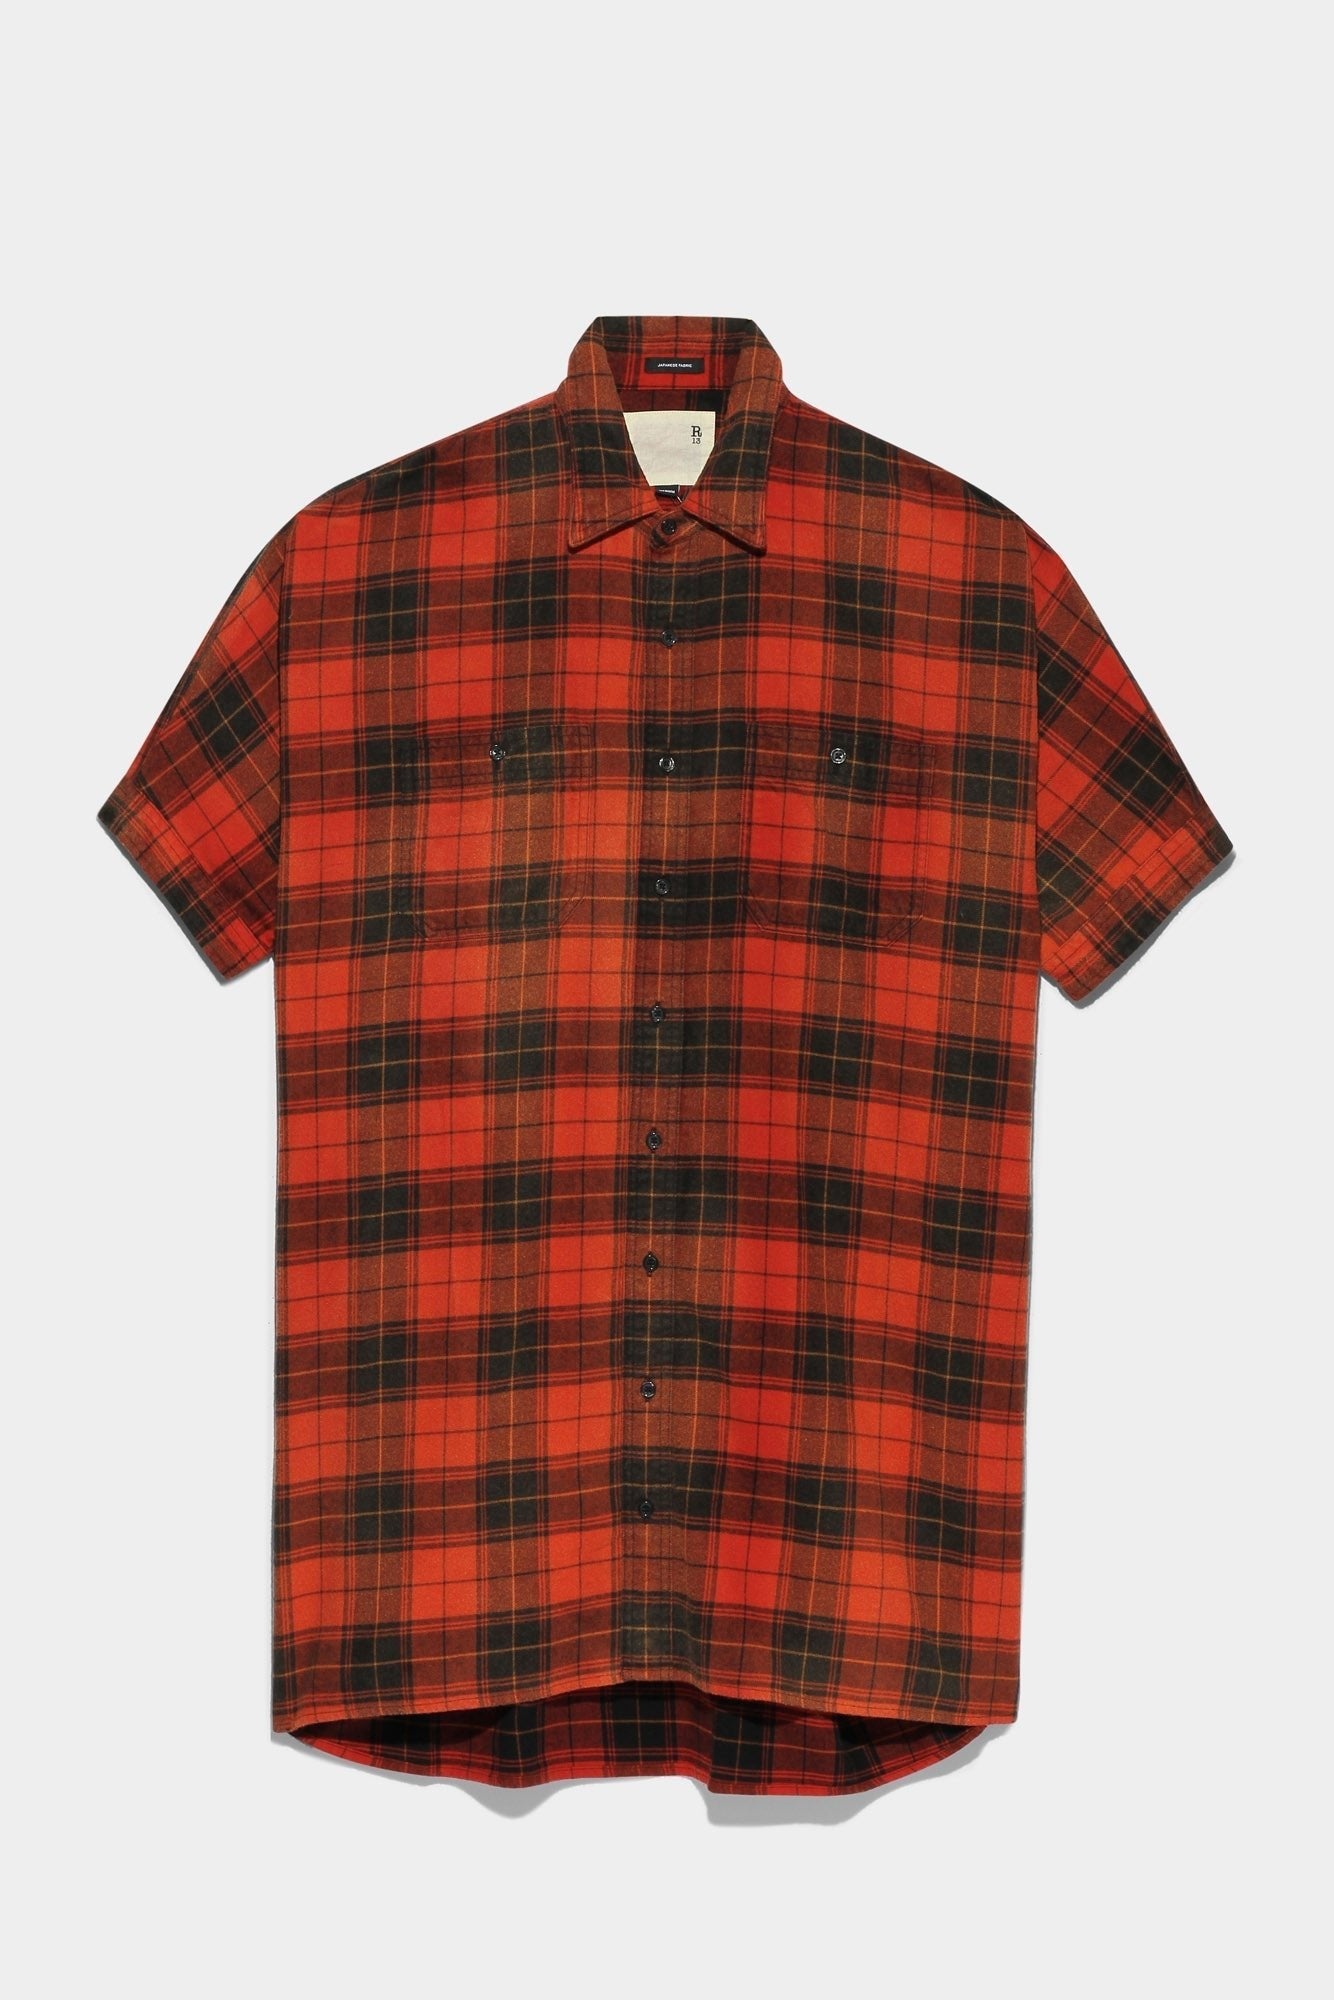 PLAID OVERSIZED BOXY - RED BLACK PLAID | R13 Official Site - 1